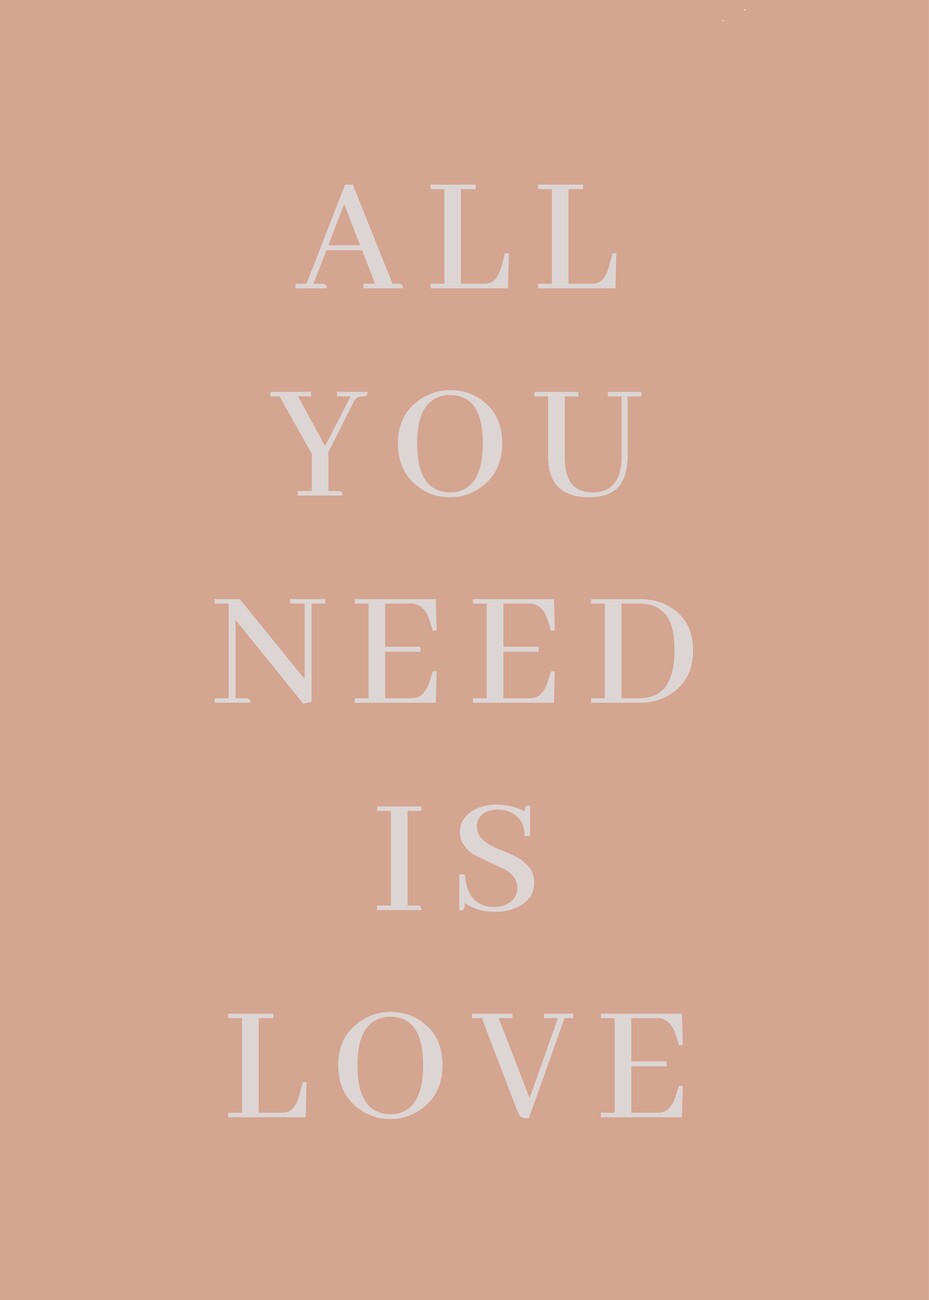 Illustration All you need is love